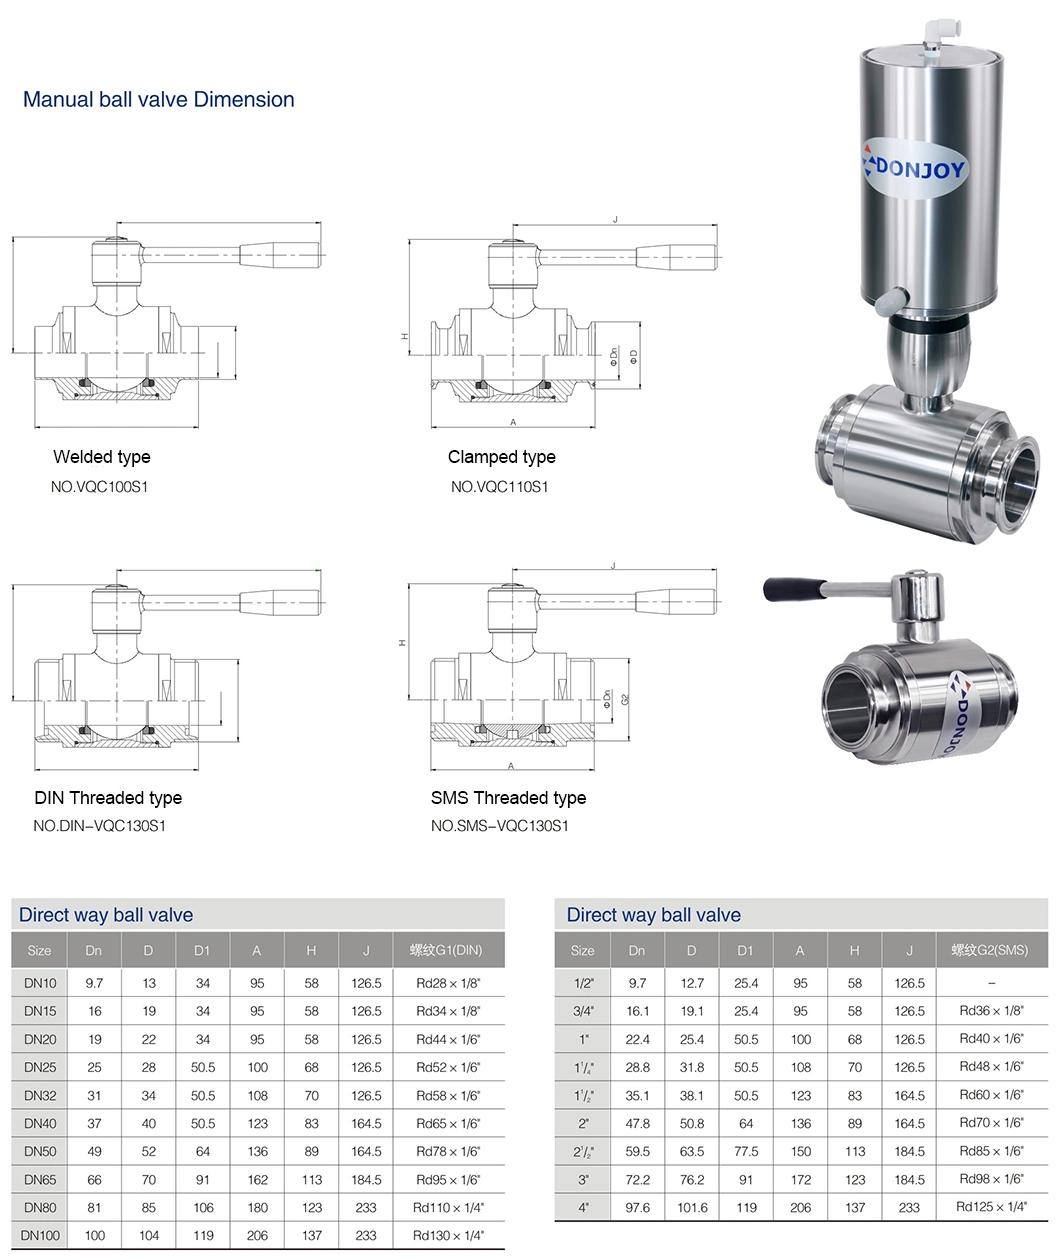 Donjoy Middle Clamp Type Ball Valve with Manual Handle